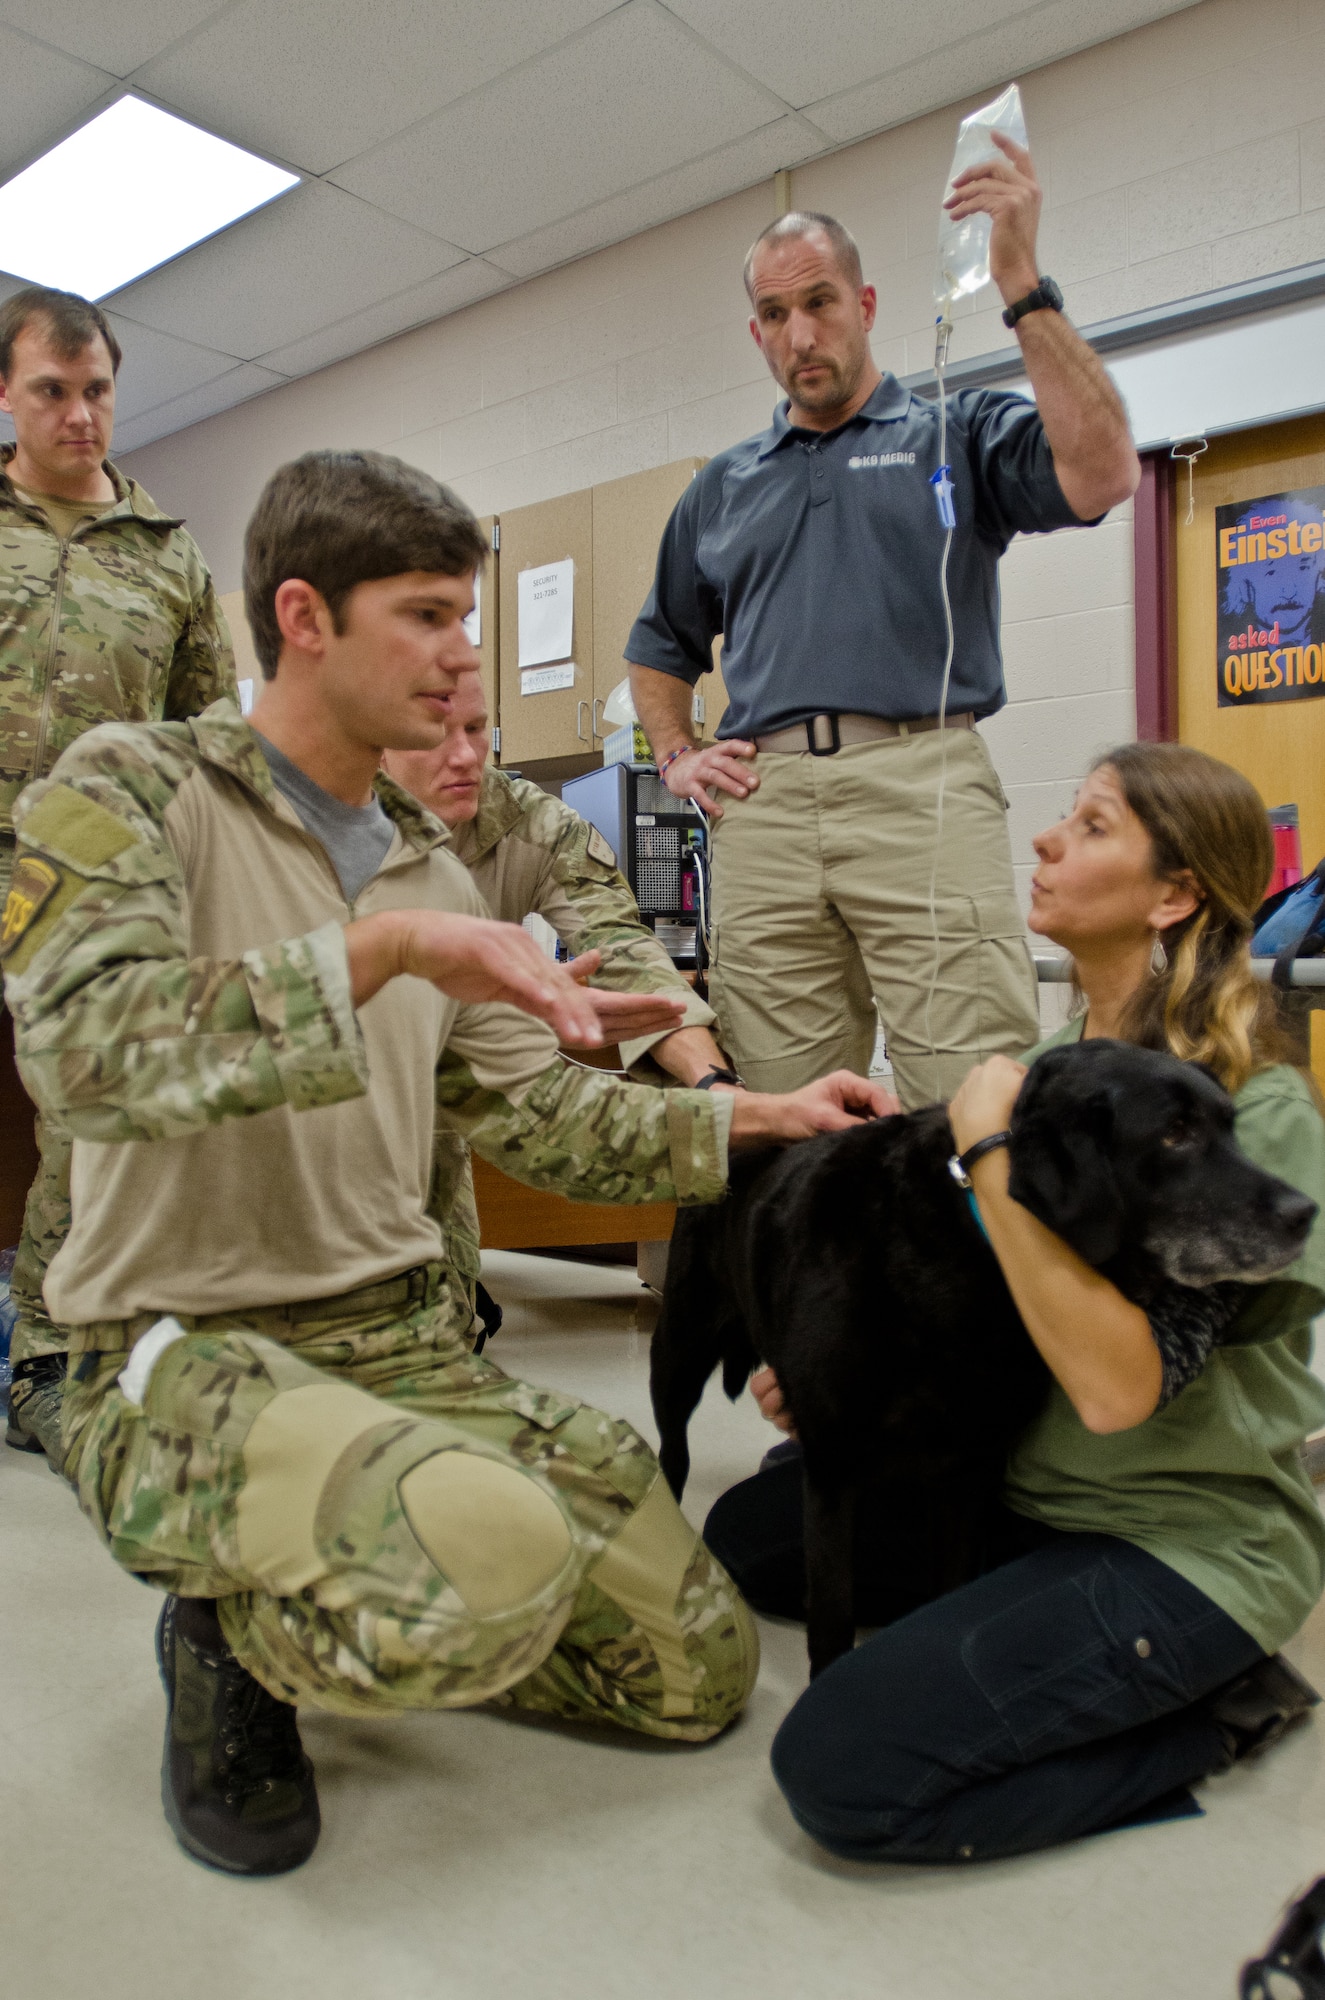 Staff Sgt. David Covel (left), a pararescueman from the Kentucky Air National Guard’s 123rd Special Tactics Squadron, helps administer an intravenous solution to a dog with the help of Thomas Barrett, a civilian paramedic and K9 medic trainer, and Kalee Pasek, a doctor of veterinary medicine and education coordinator for K9 medics at Jefferson Community College in Shelbyville, Ky., Dec. 5, 2013, as part of a  two-day training course. Covel is one of 10 Kentucky Air Guard pararescuemen who learned to treat military working dogs during the course. (U.S. Air National Guard photo by Master Sgt. Phil Speck)